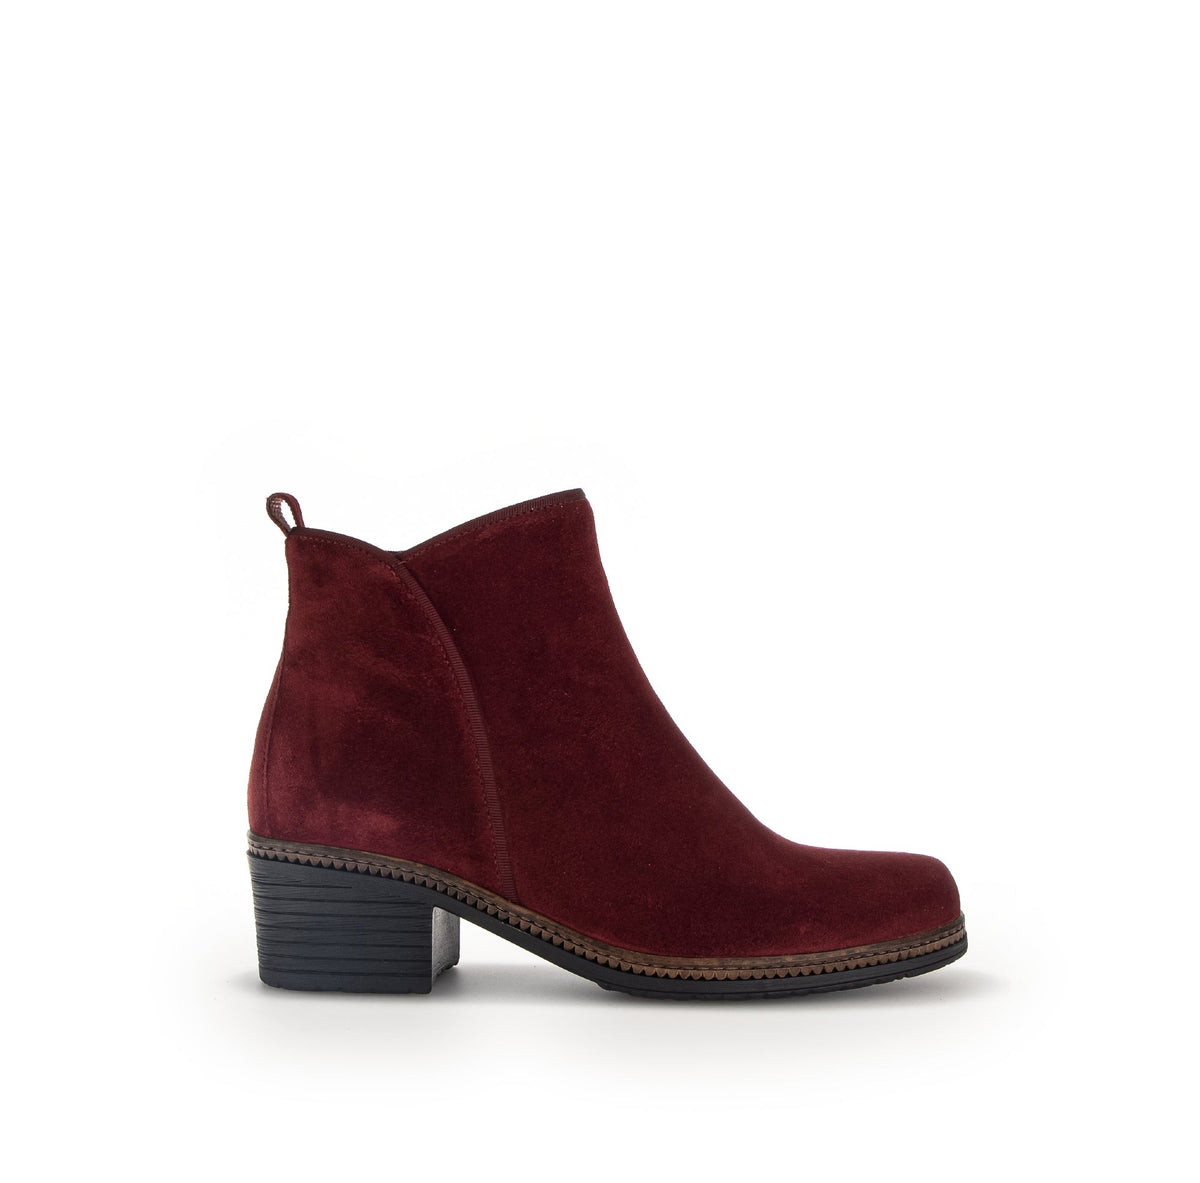 Marlham Ankle Boots